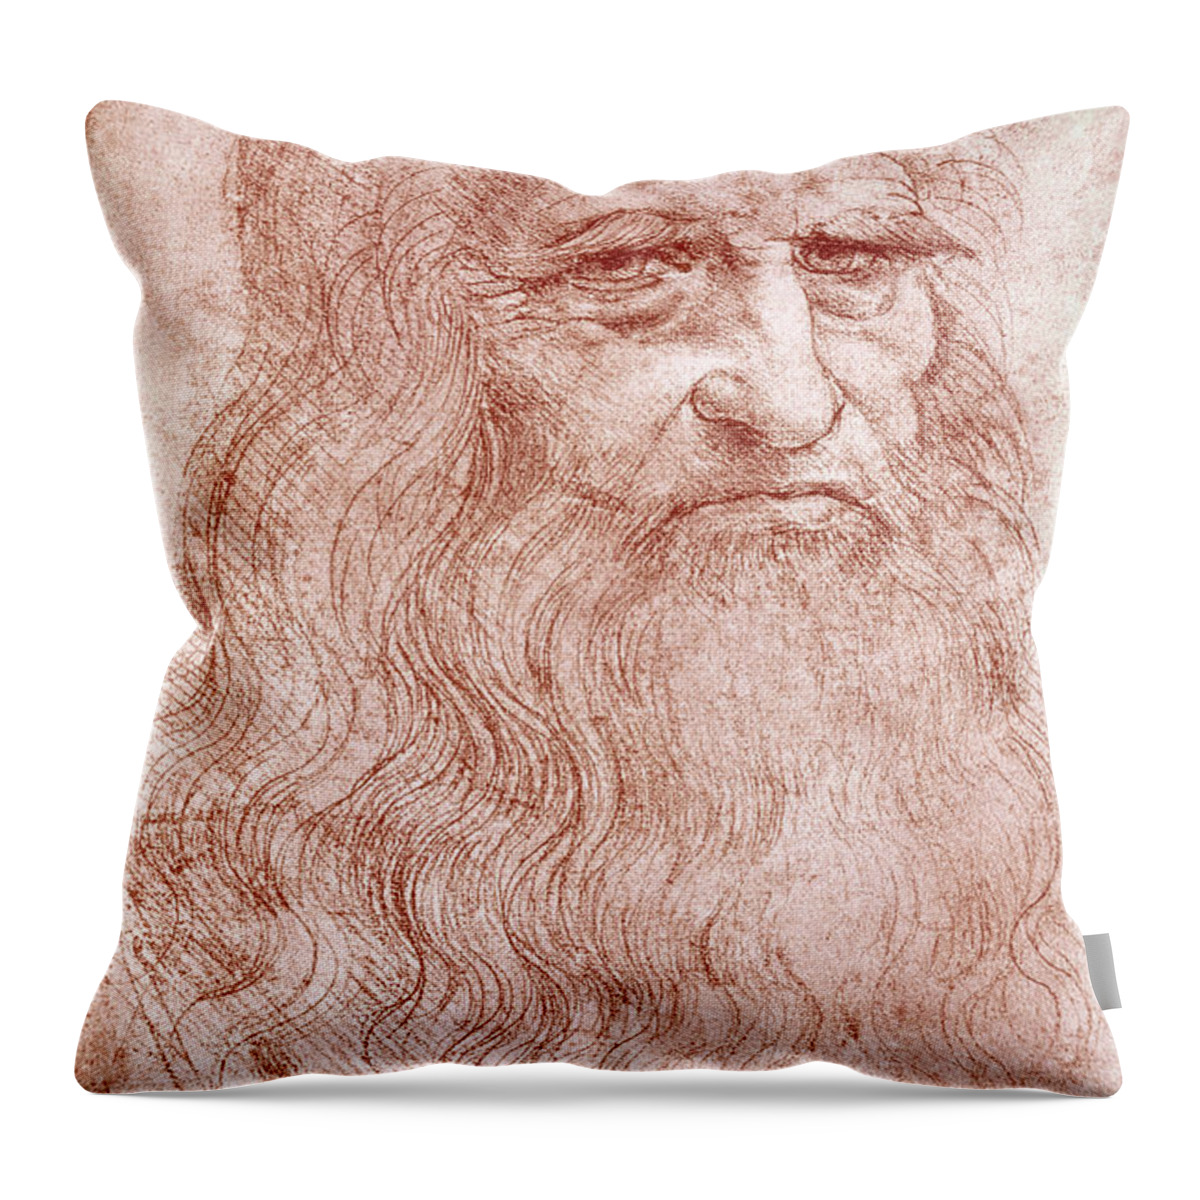 Old Throw Pillow featuring the painting Portrait of a Bearded Man by Leonardo da Vinci